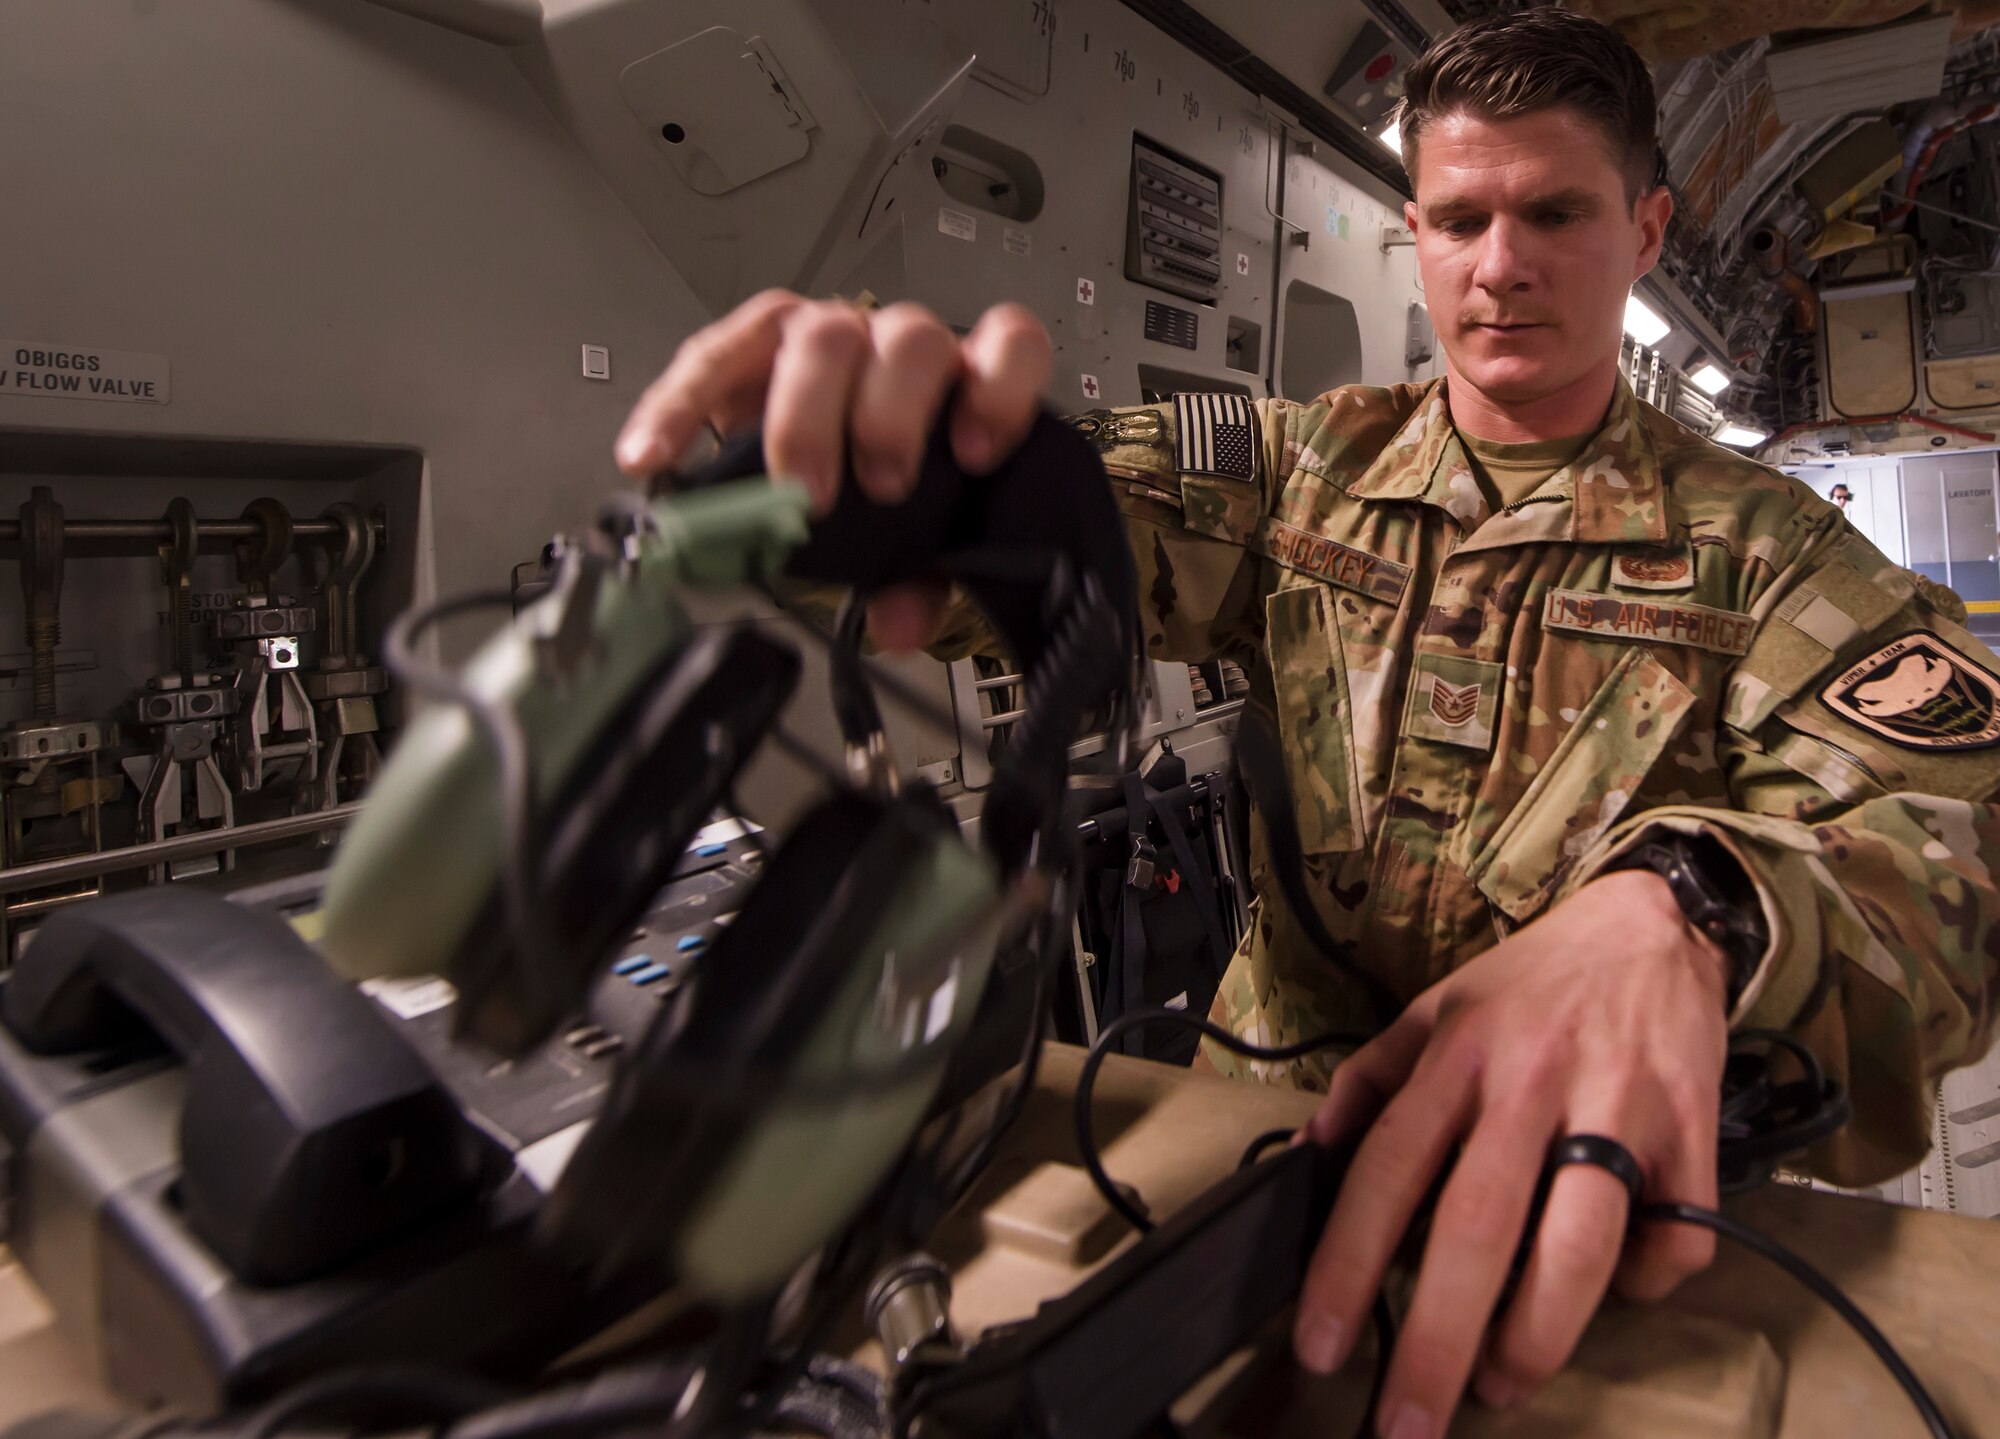 Tech. Sgt. Stephen Shockey, 379th Expeditionary Communications Squadron Viper team operator, sets up an “HSD-400” radio system on a C-17 Globemaster III March 5, 2019, at Al Udeid Air Base, Qatar.